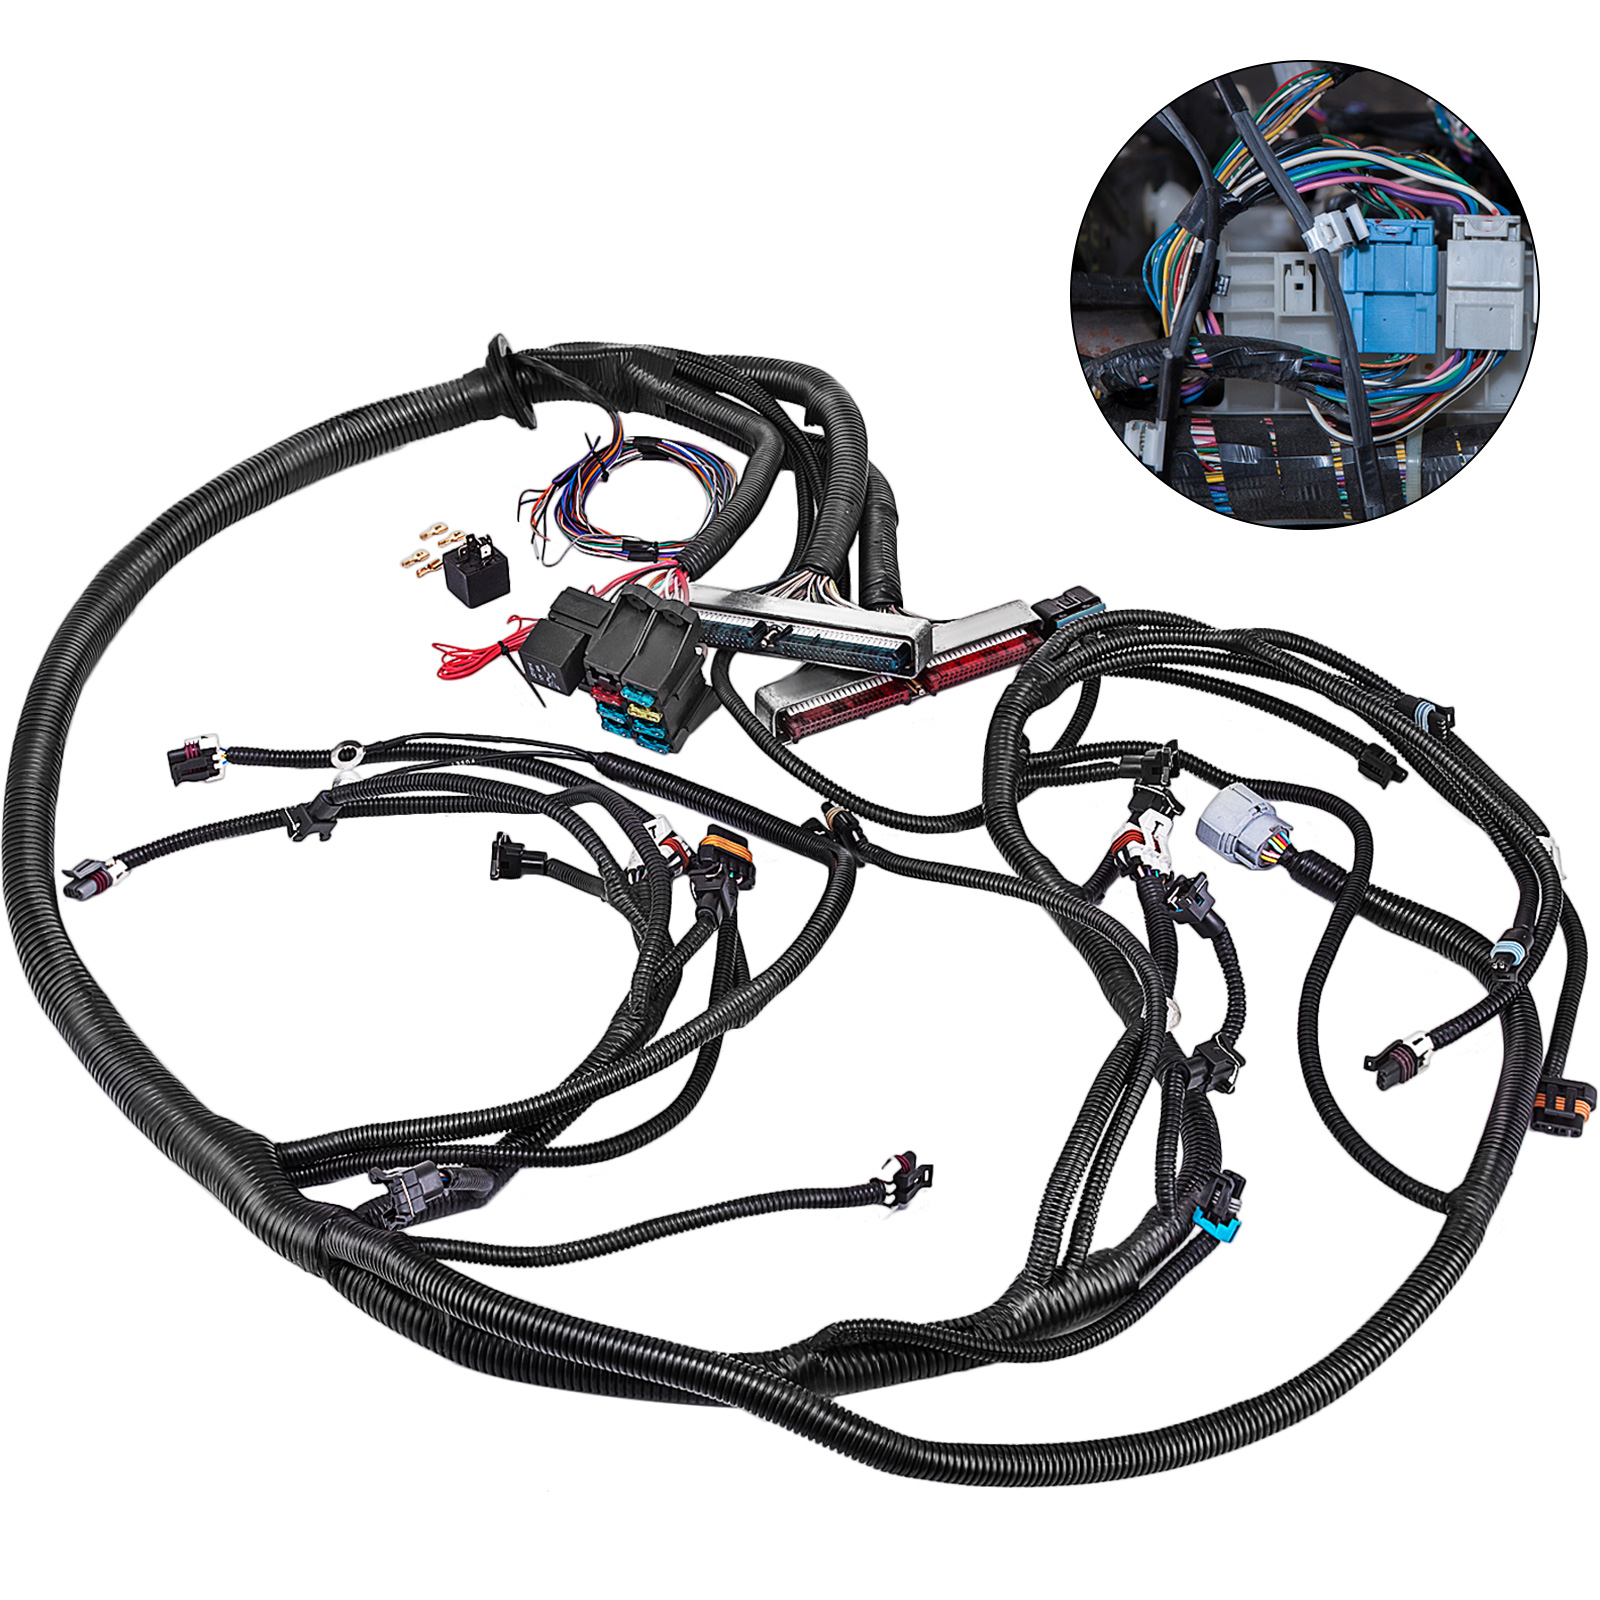 1997-2002 DBC LS1/LSX Stand Alone Wiring Harness With 4L60e Transmission от Vevor Many GEOs